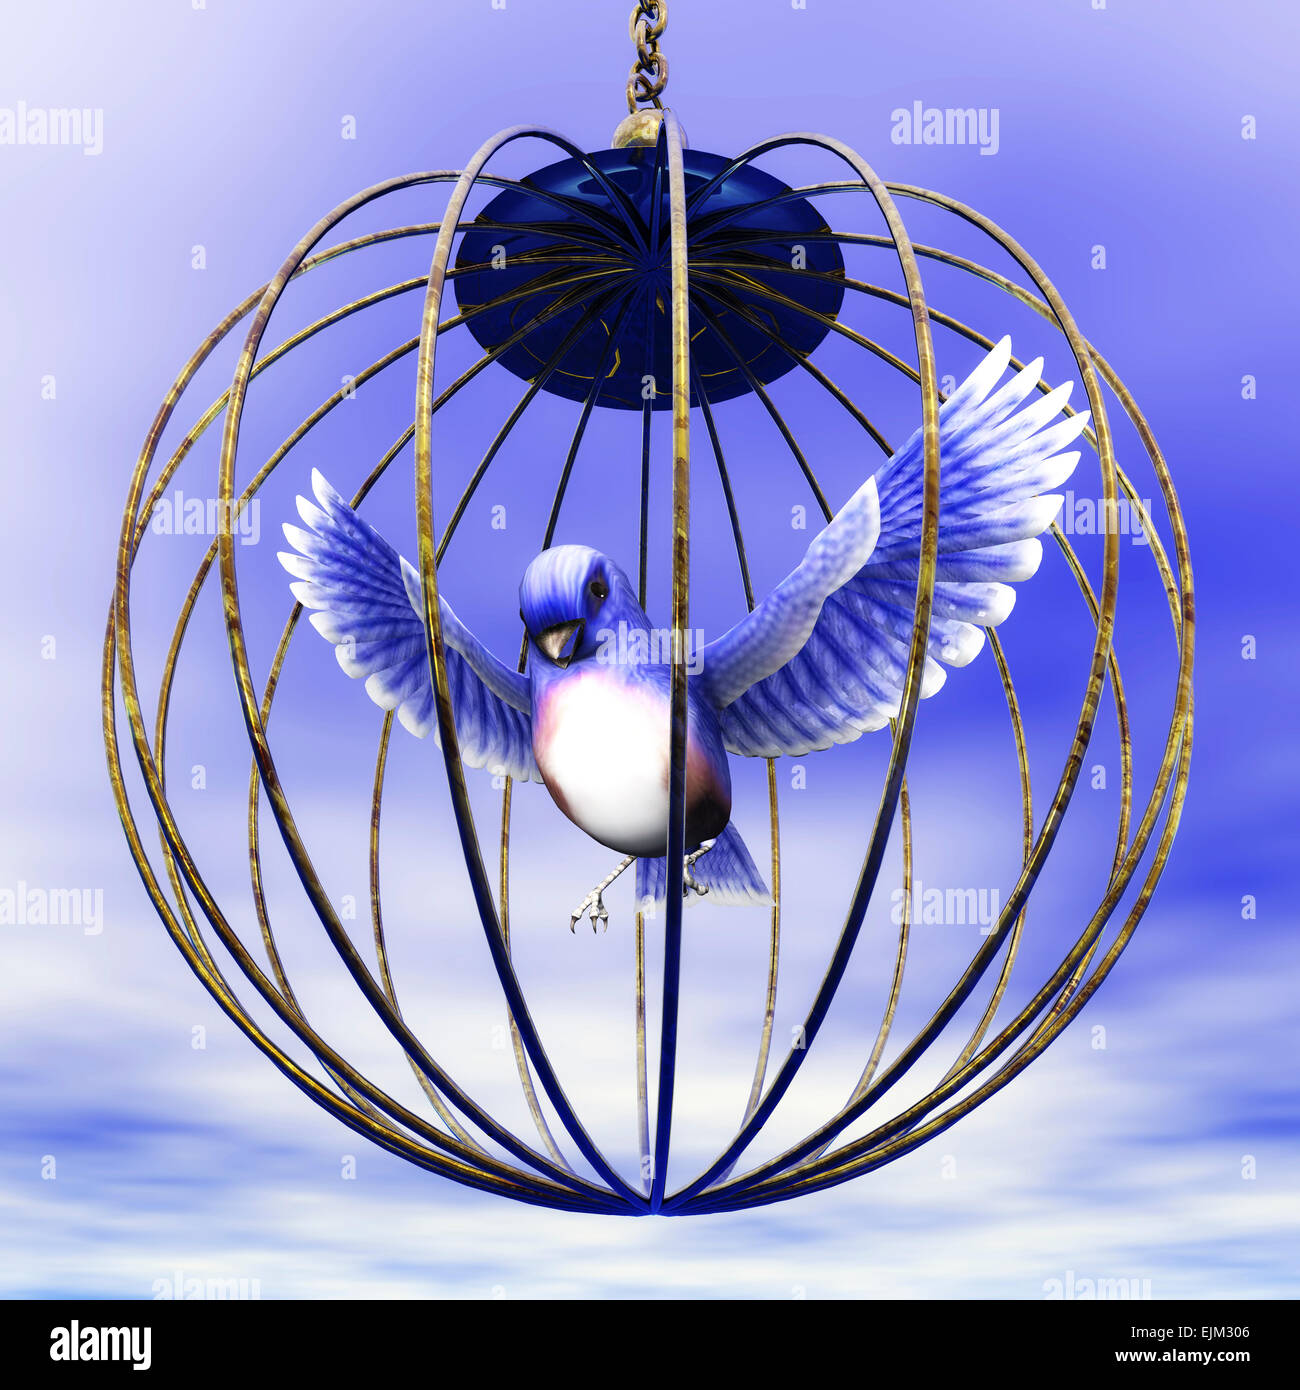 Digital Illustration of a golden Cage Stock Photo